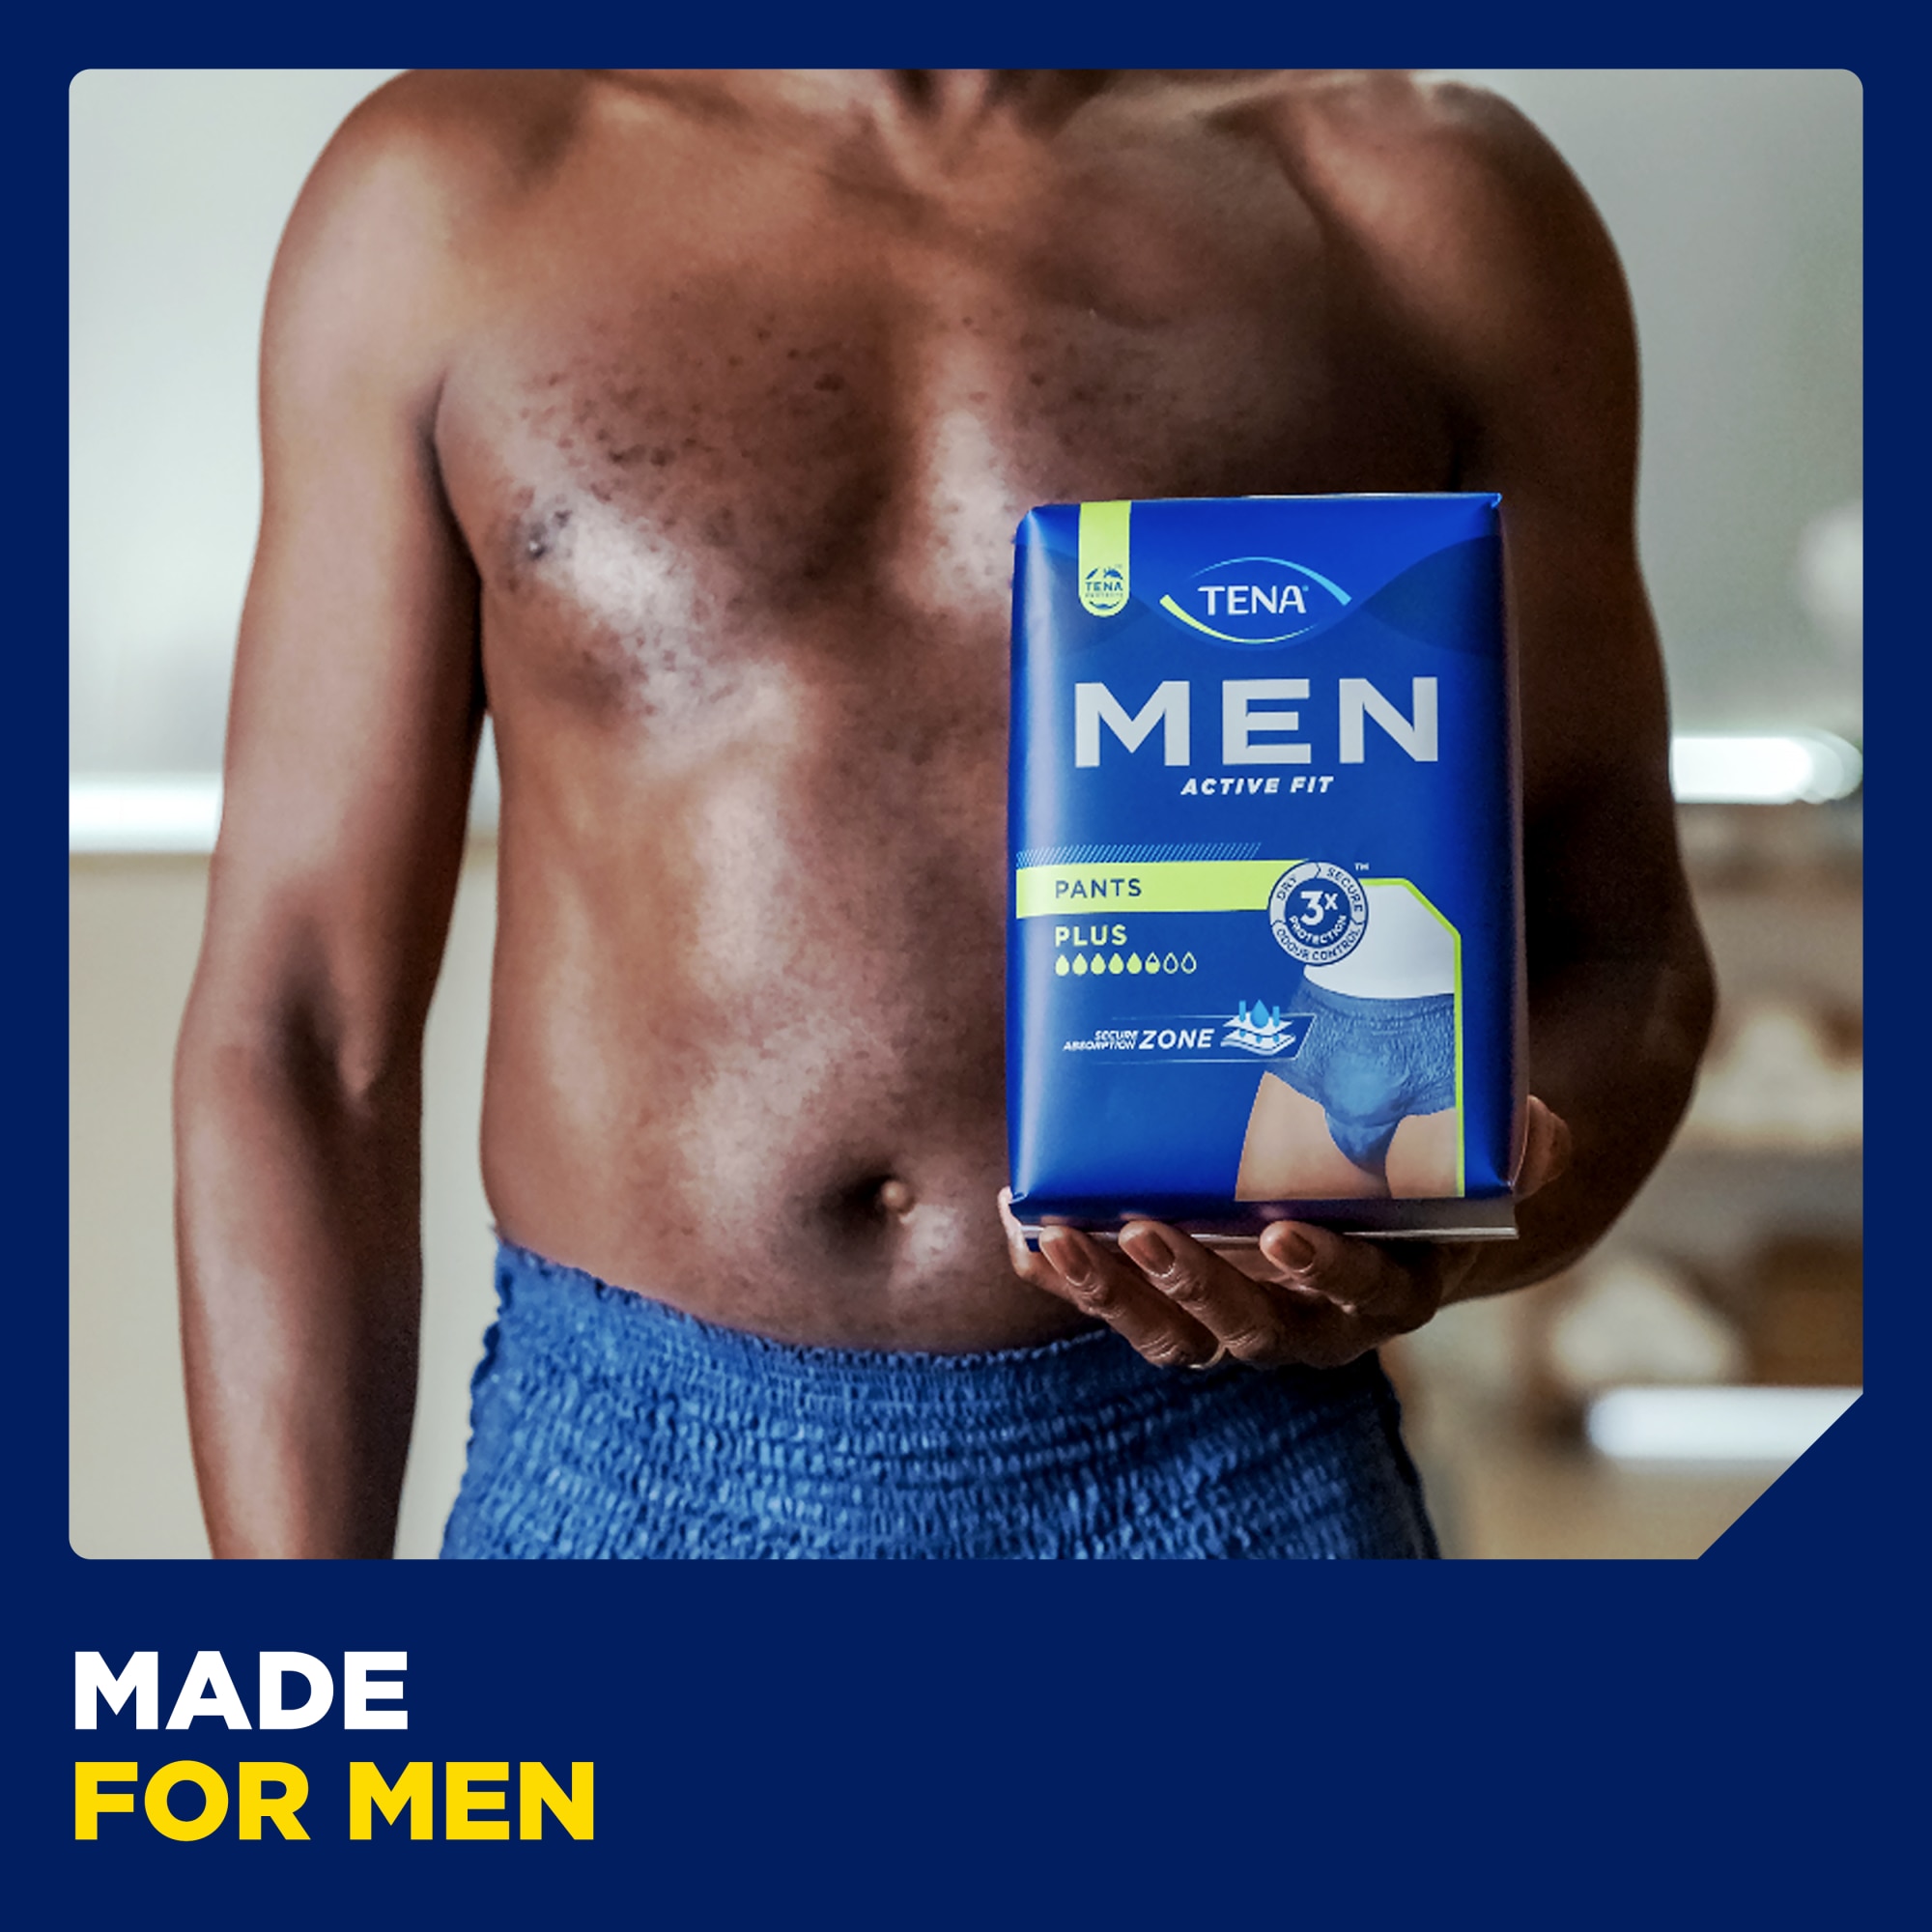 TENA South Africa  TENA Pants Normal are soft and comfortable incontinence  pants designed for women and men great for both day and night You can now  order a free single sample